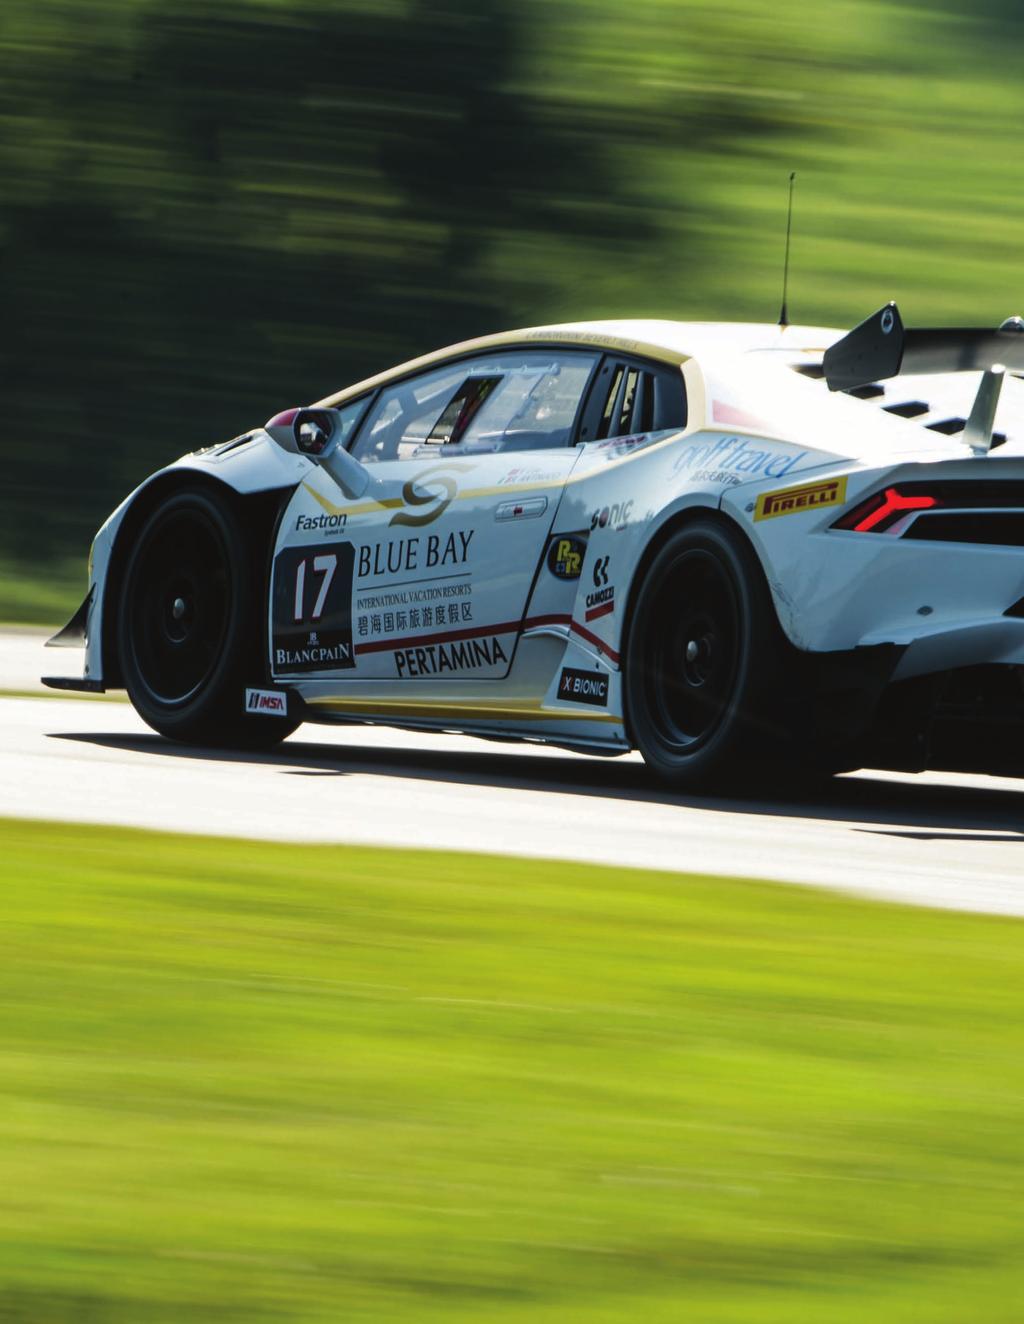 This exciting television partnership with CBS Sports Network is a significant milestone in the growth of the Lamborghini Blancpain Super Trofeo North America, providing even more evidence of its